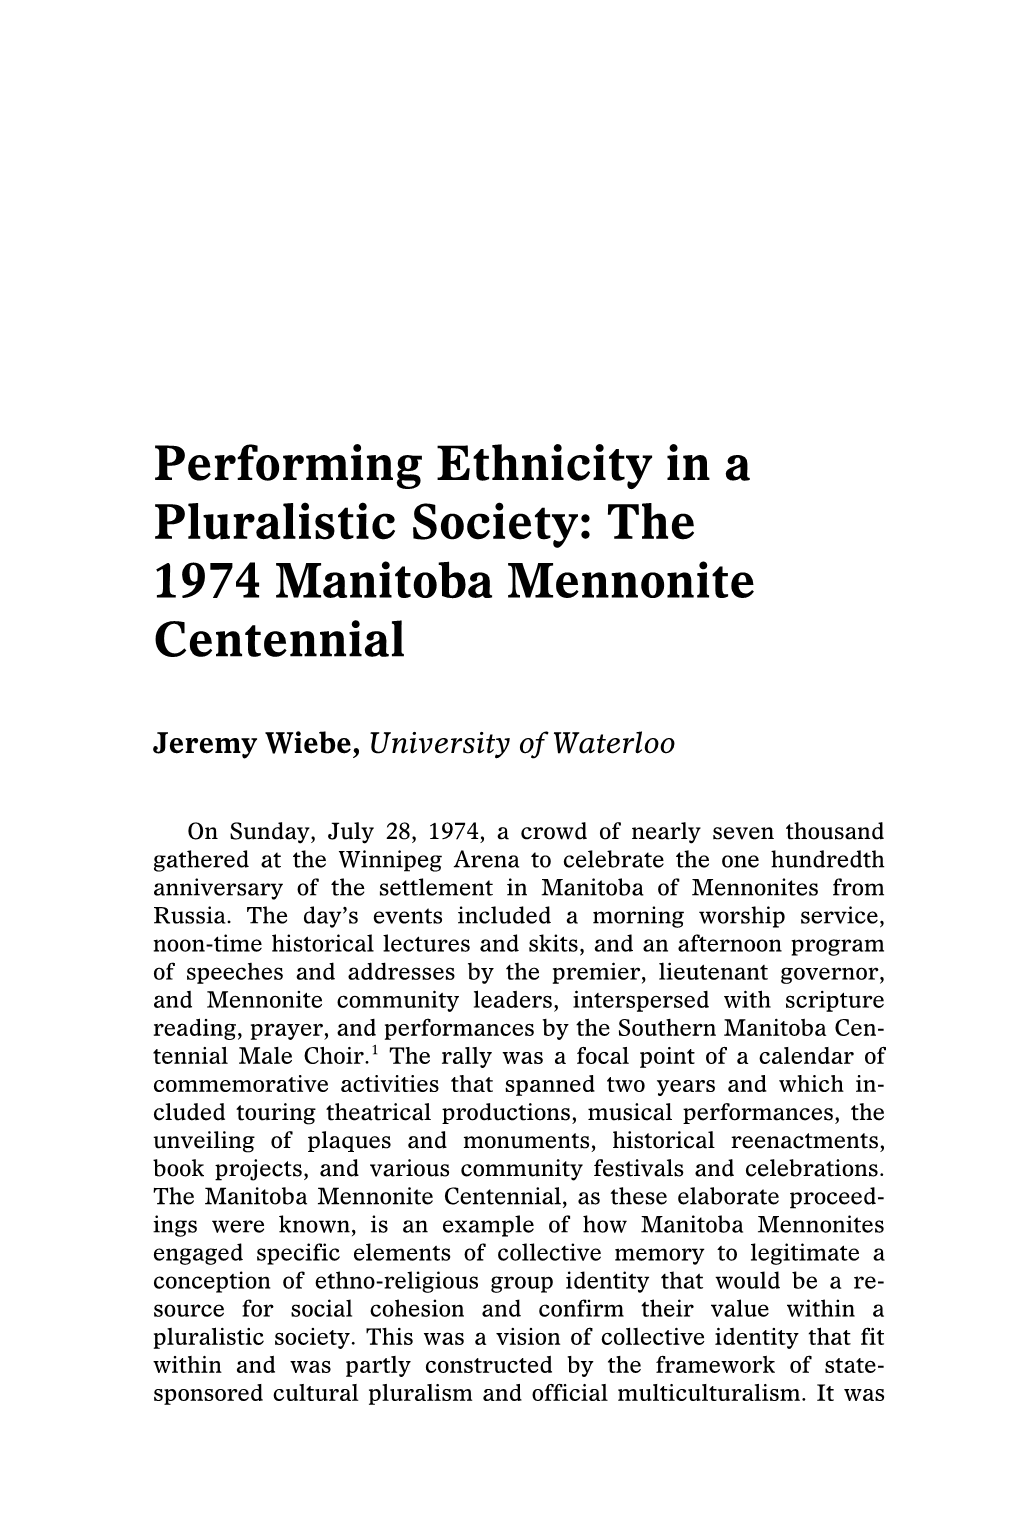 Performing Ethnicity in a Pluralistic Society: the 1974 Manitoba Mennonite Centennial